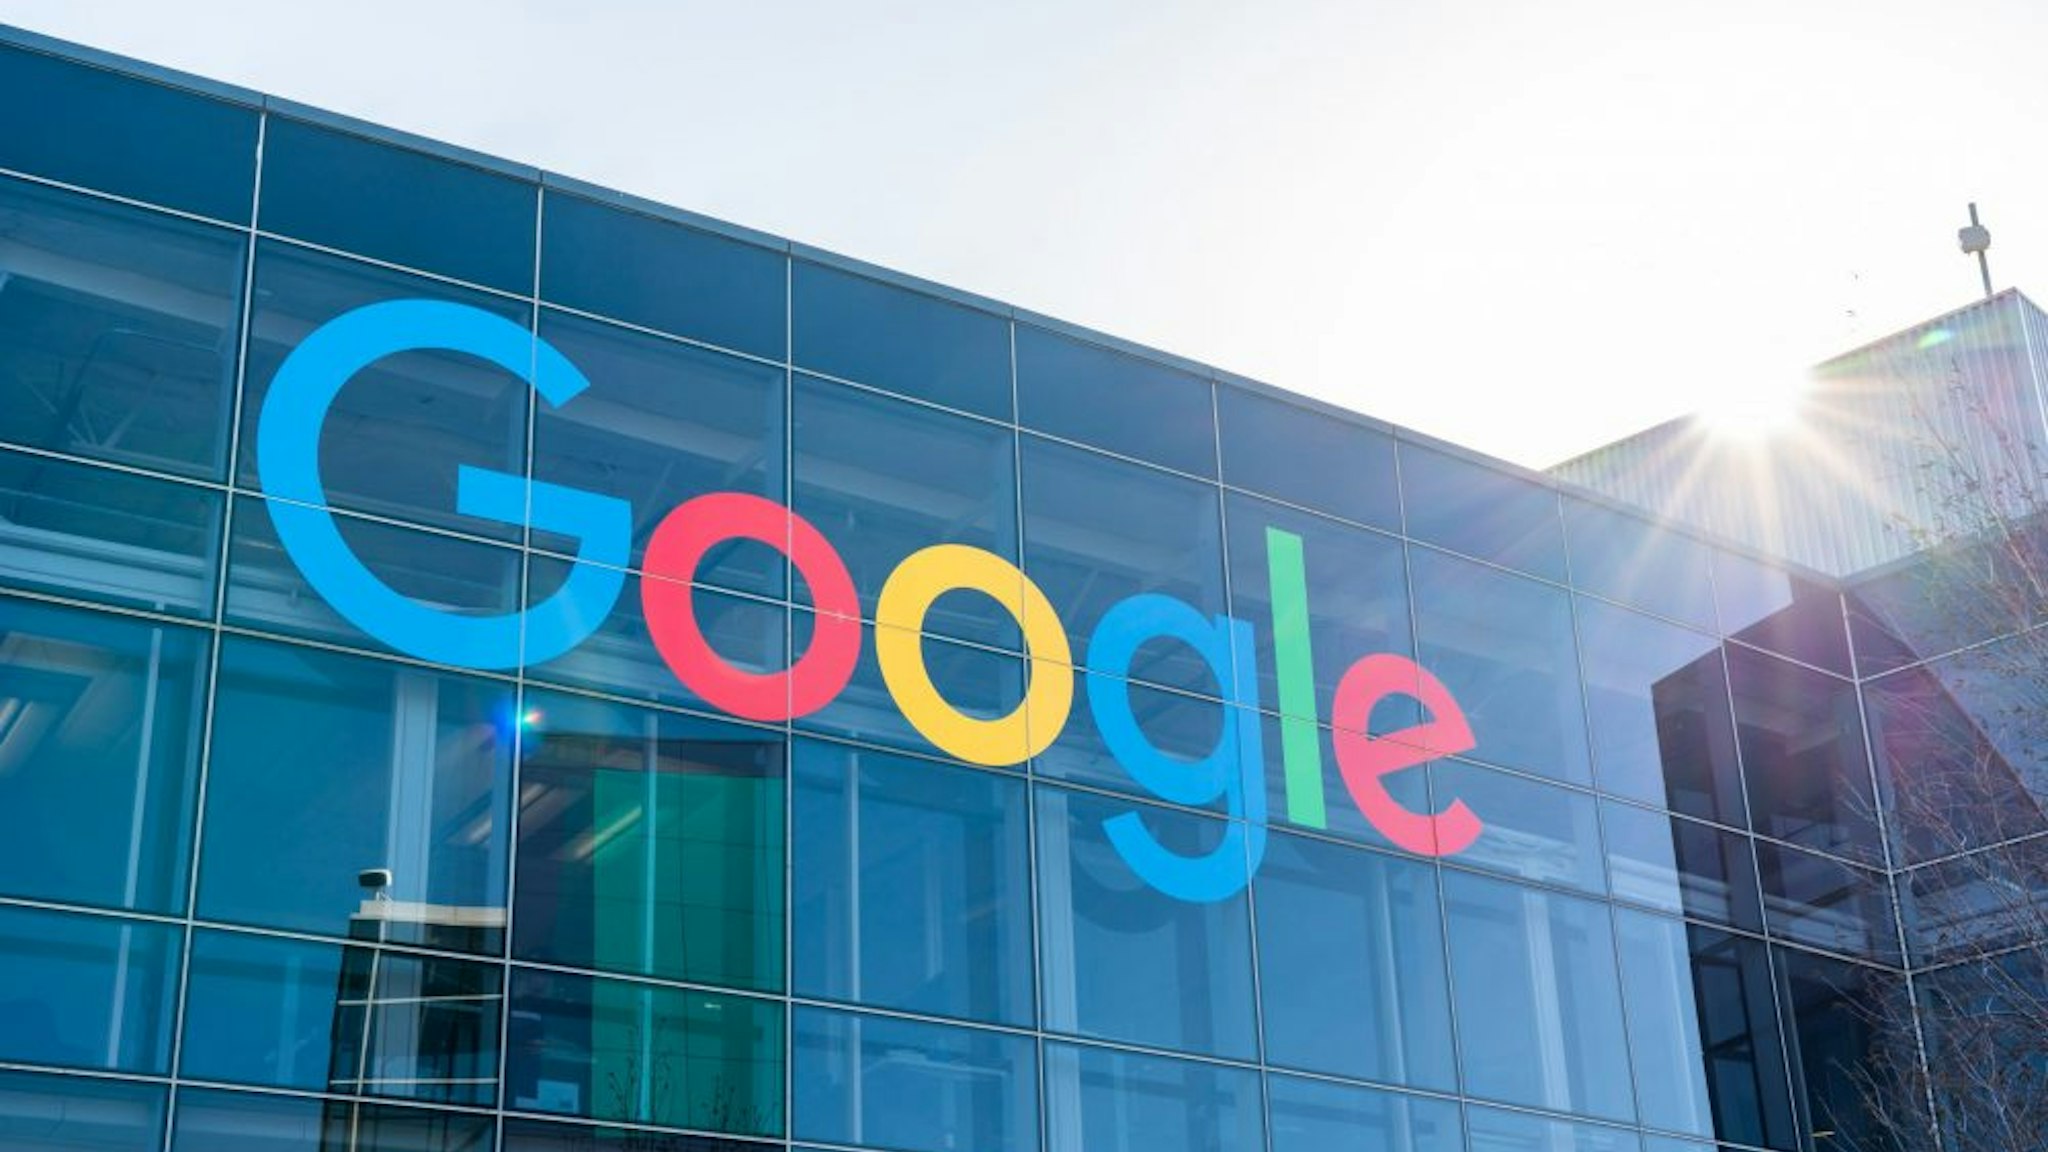 MOUNTAIN VIEW, UNITED STATES - 2020/02/23: American multinational technology company Google logo seen at Googleplex, the corporate headquarters complex of Google and its parent company Alphabet Inc.